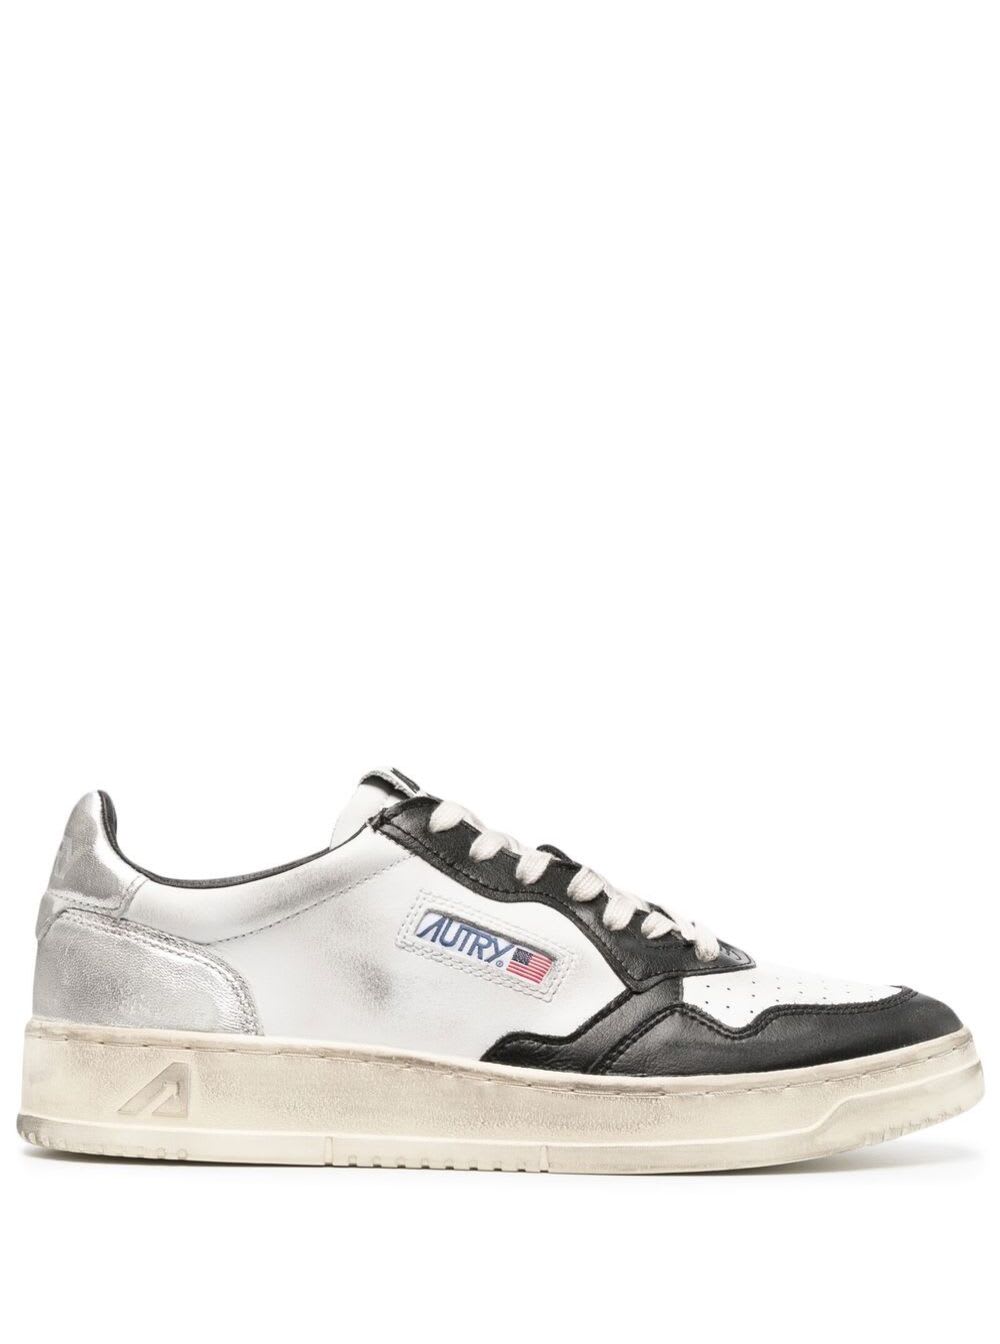 Shop Autry Black And White Medalist Low Top Sneakers Distressed Finish In Cow Leather